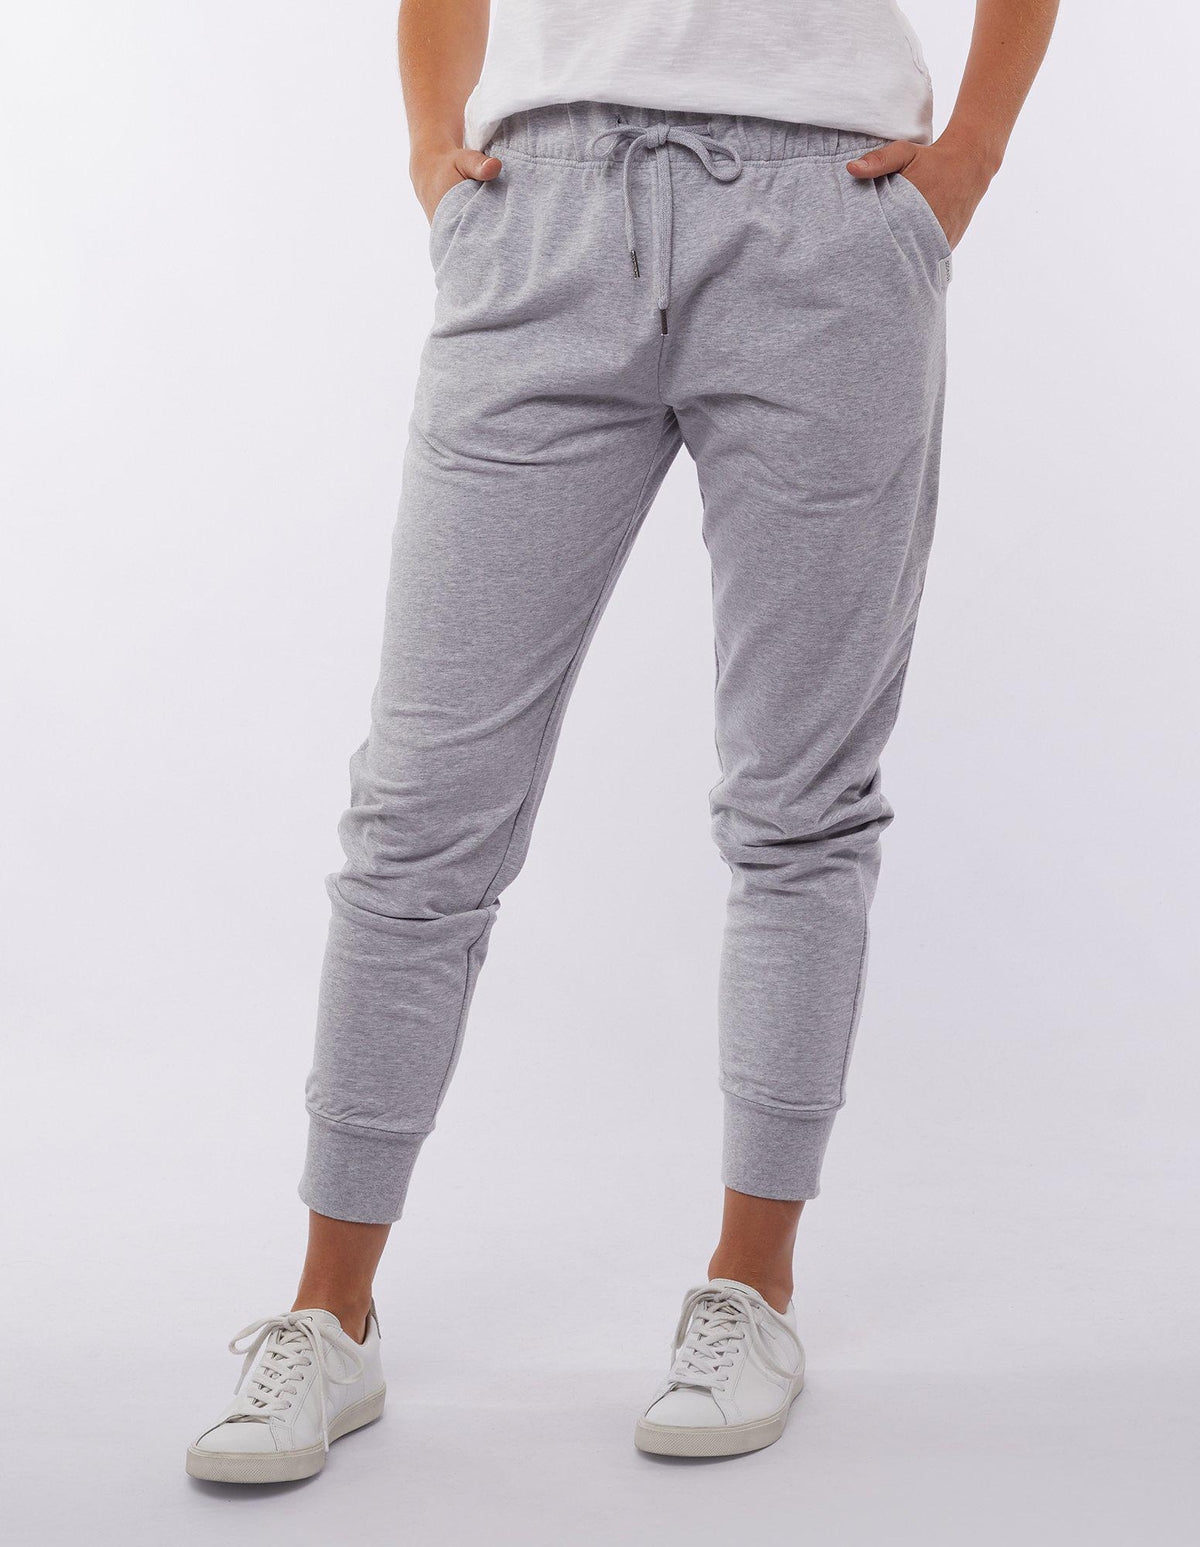 Lazy Days Pants - Grey Marle - Foxwood - FUDGE Gifts Home Lifestyle